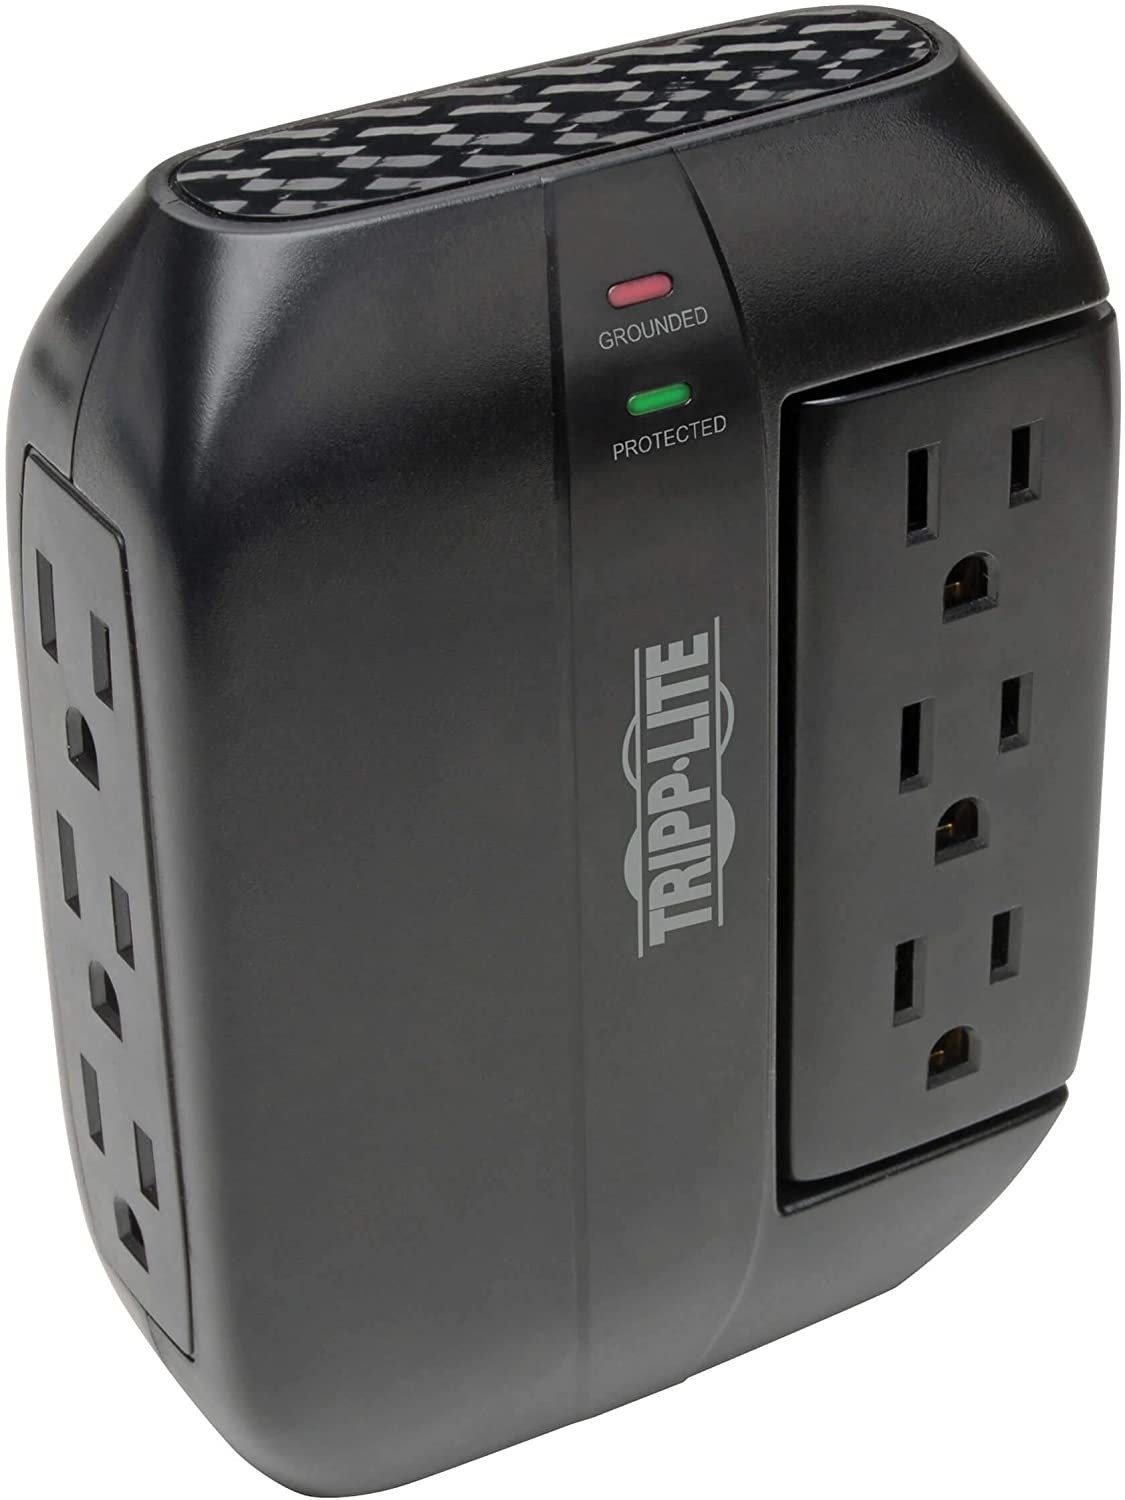 Tripp Lite SWIVEL6 6 Outlet Surge Protector Power Strip, 3 Rotatable Outlets, Black, Lifetime Limited Warranty &amp; Dollar 20,000 Insurance 6 Rotatable Outlet Direct Plug-in Outlet